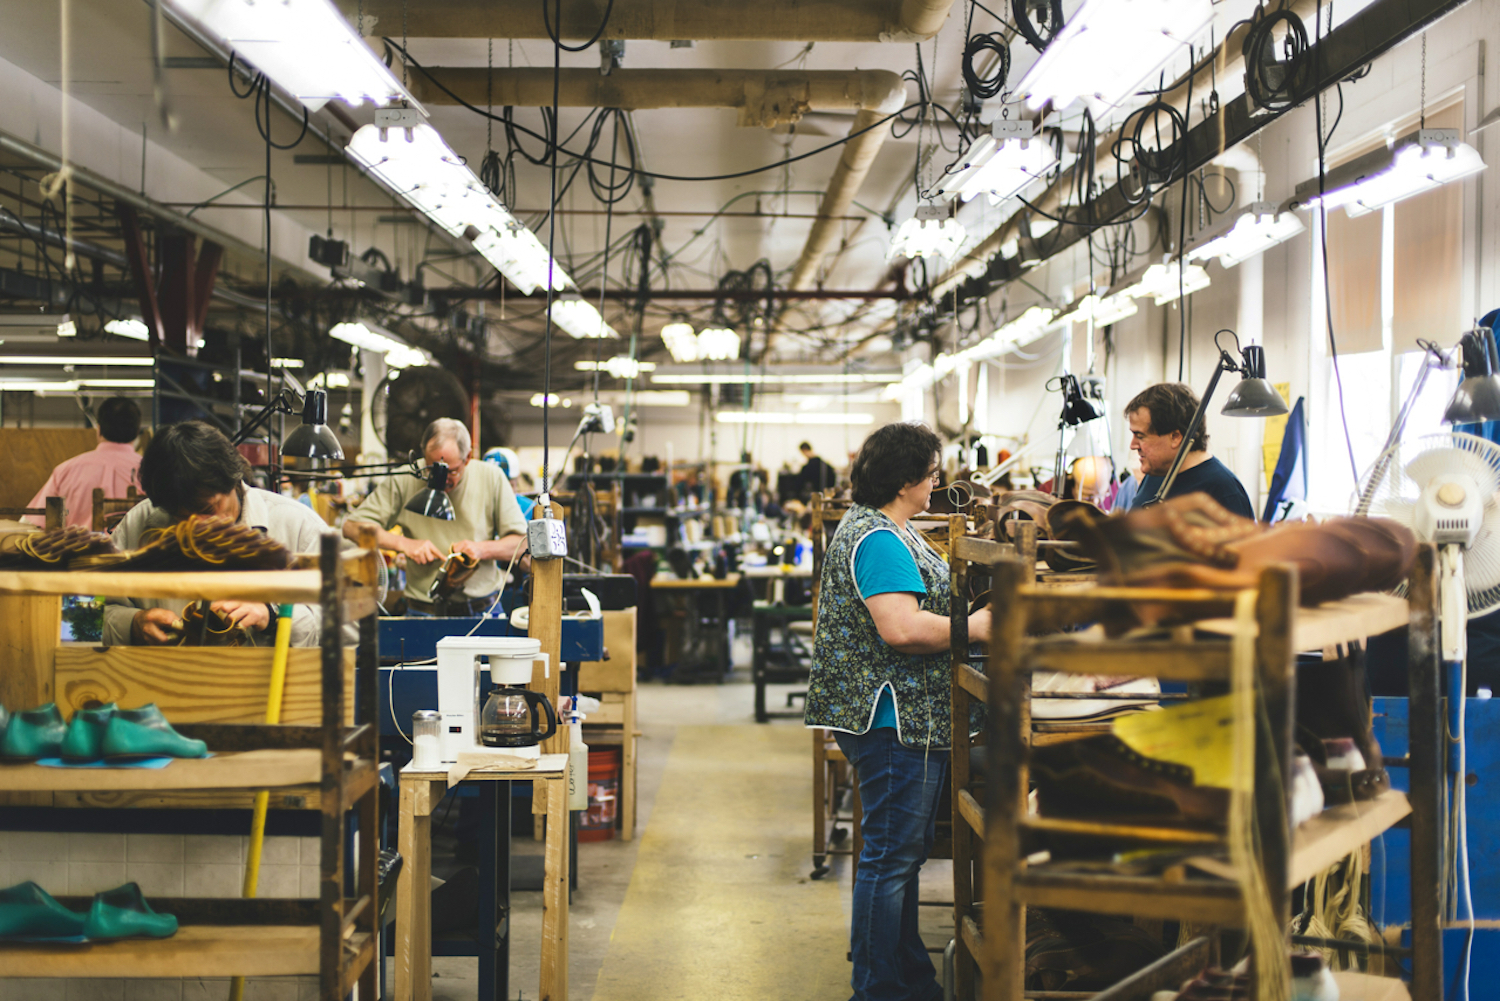 People working in the Rancourt factory.